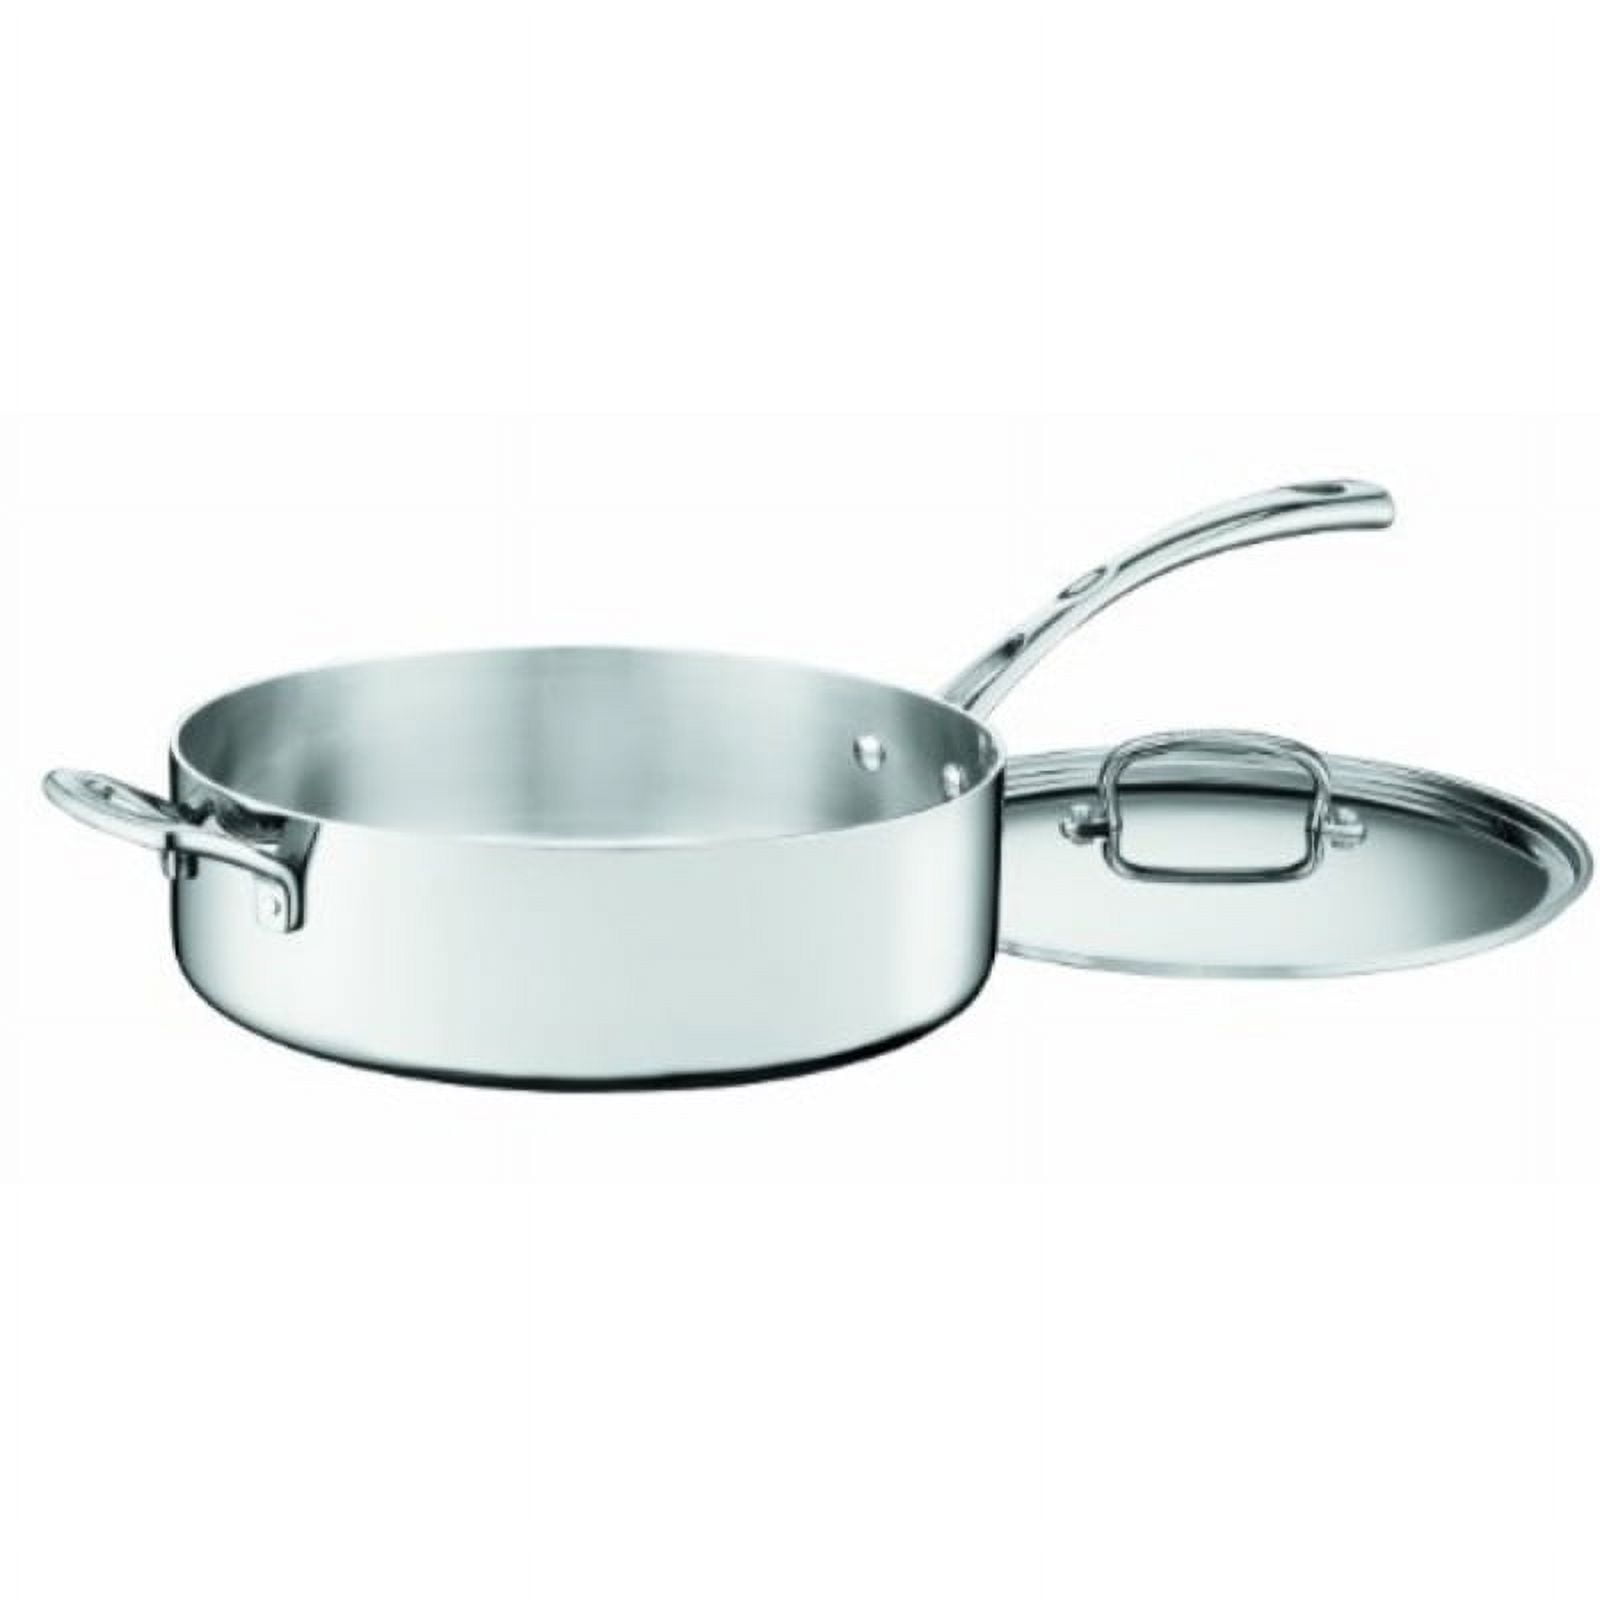 CUISINART SAUTE PAN W HELPER HANDLE AND COVER 10 3.5 QT #933-24H 18/10  STAINLES